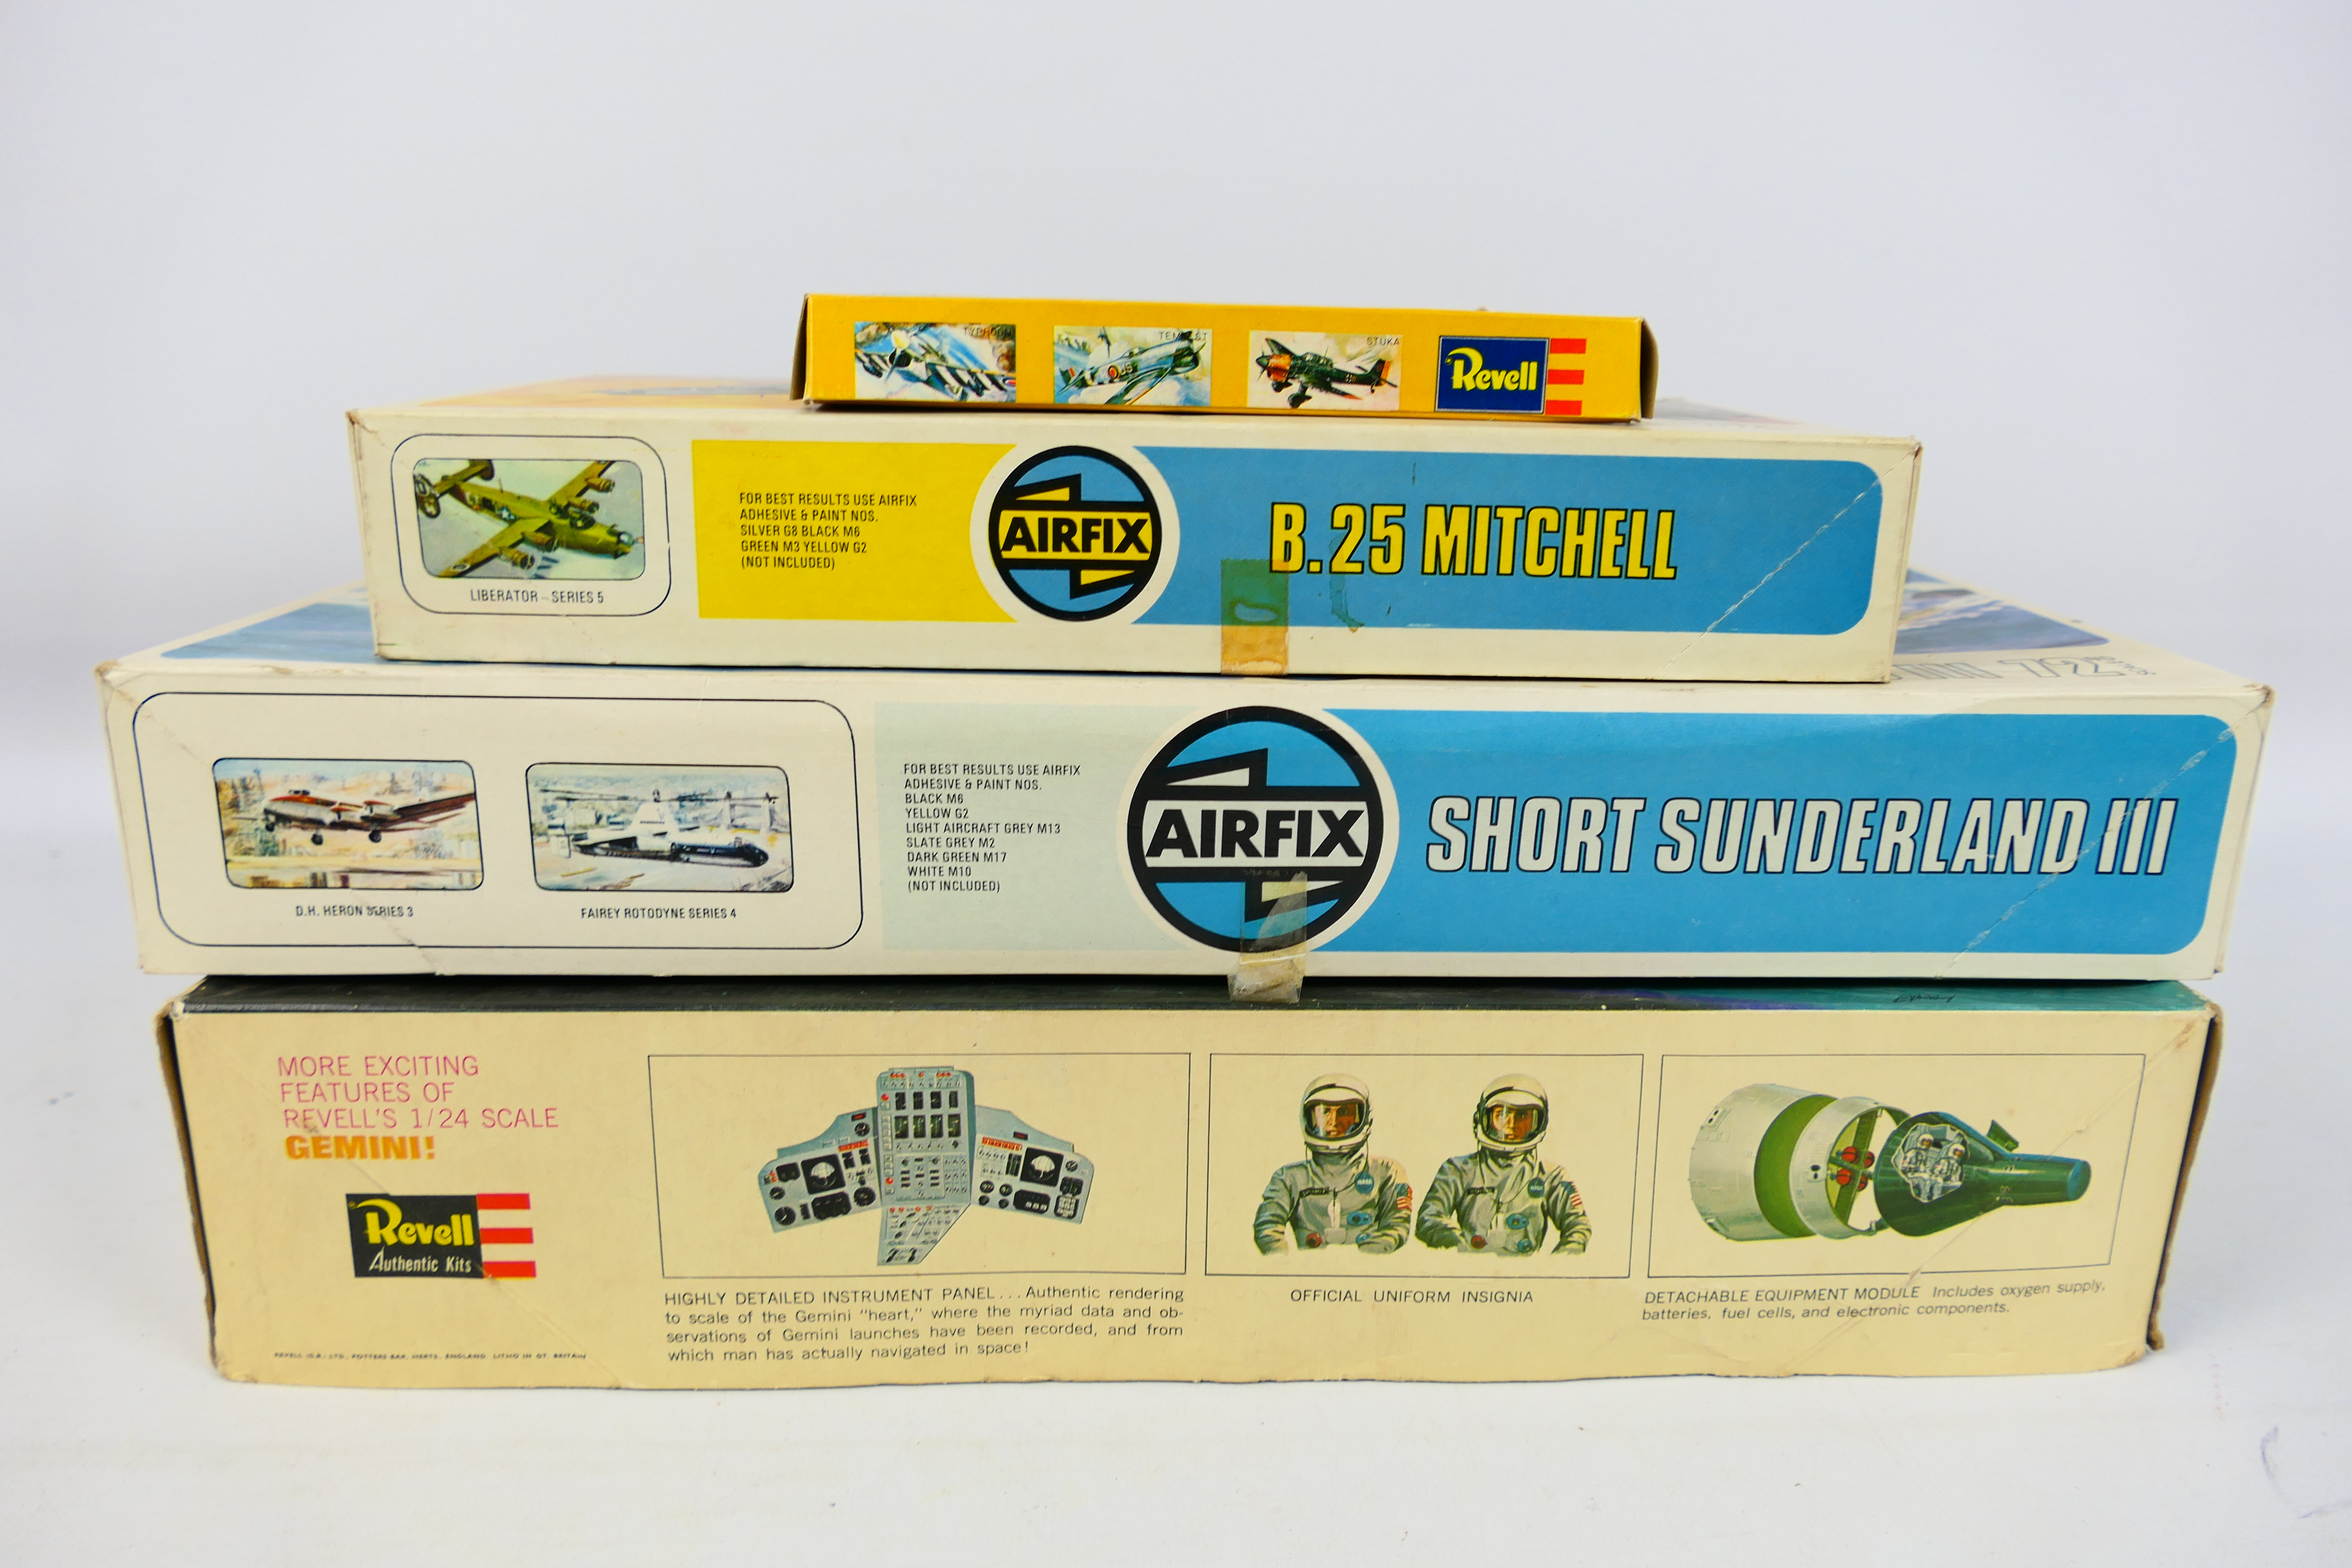 Airfix - Revell - Matchbox - 4 x vintage model kits including Gemini space capsule in 1:24 scale # - Image 9 of 12